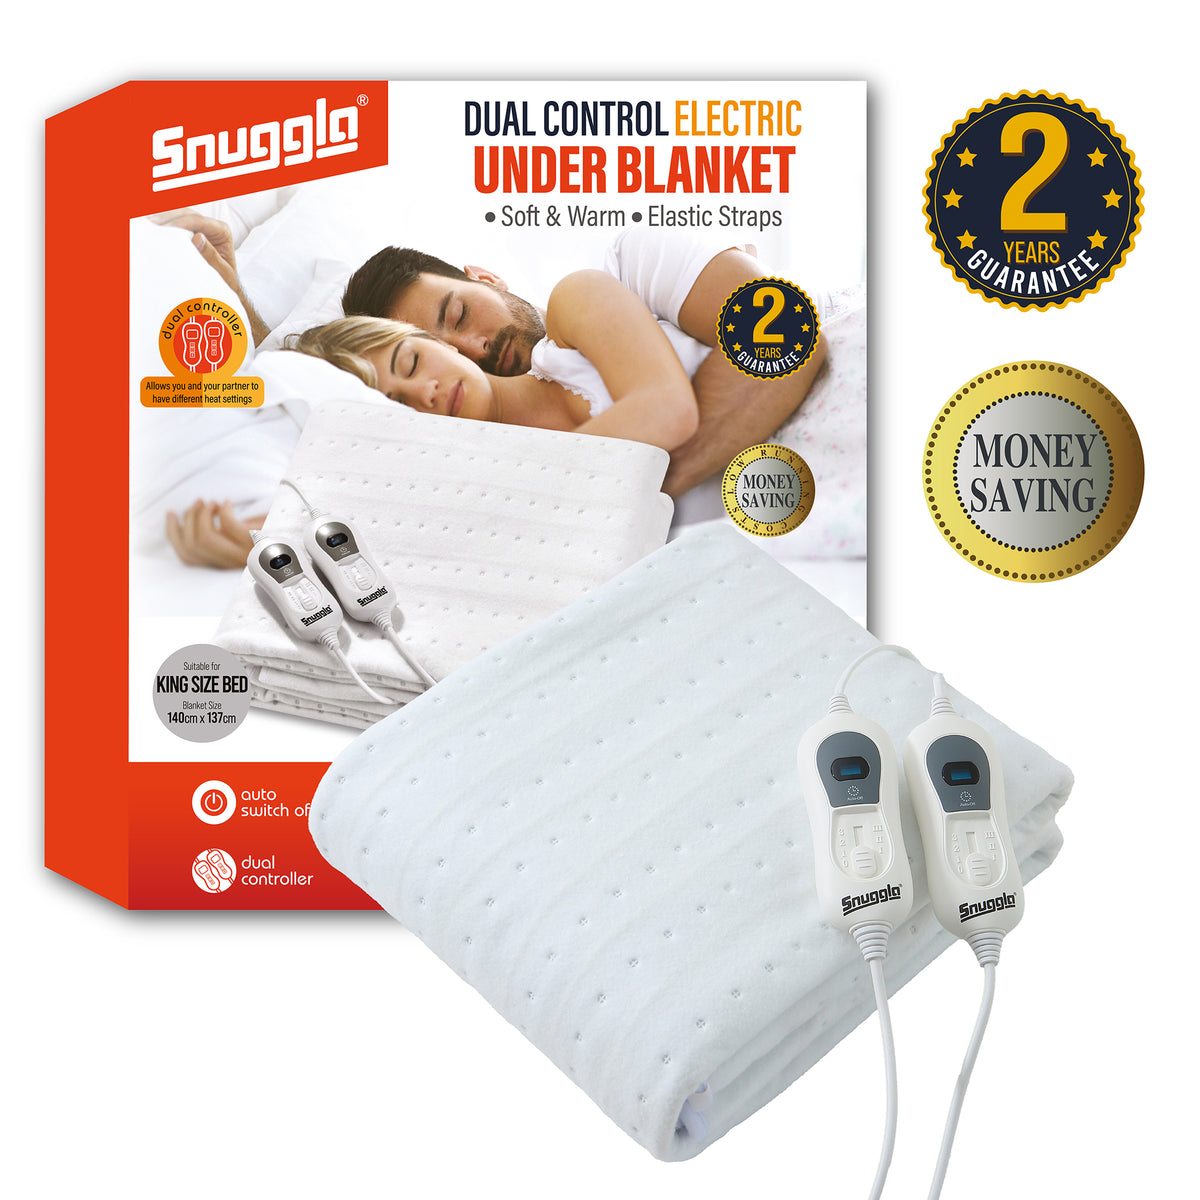 King Size Heated Electric Under Blanket with 3 Heat Settings